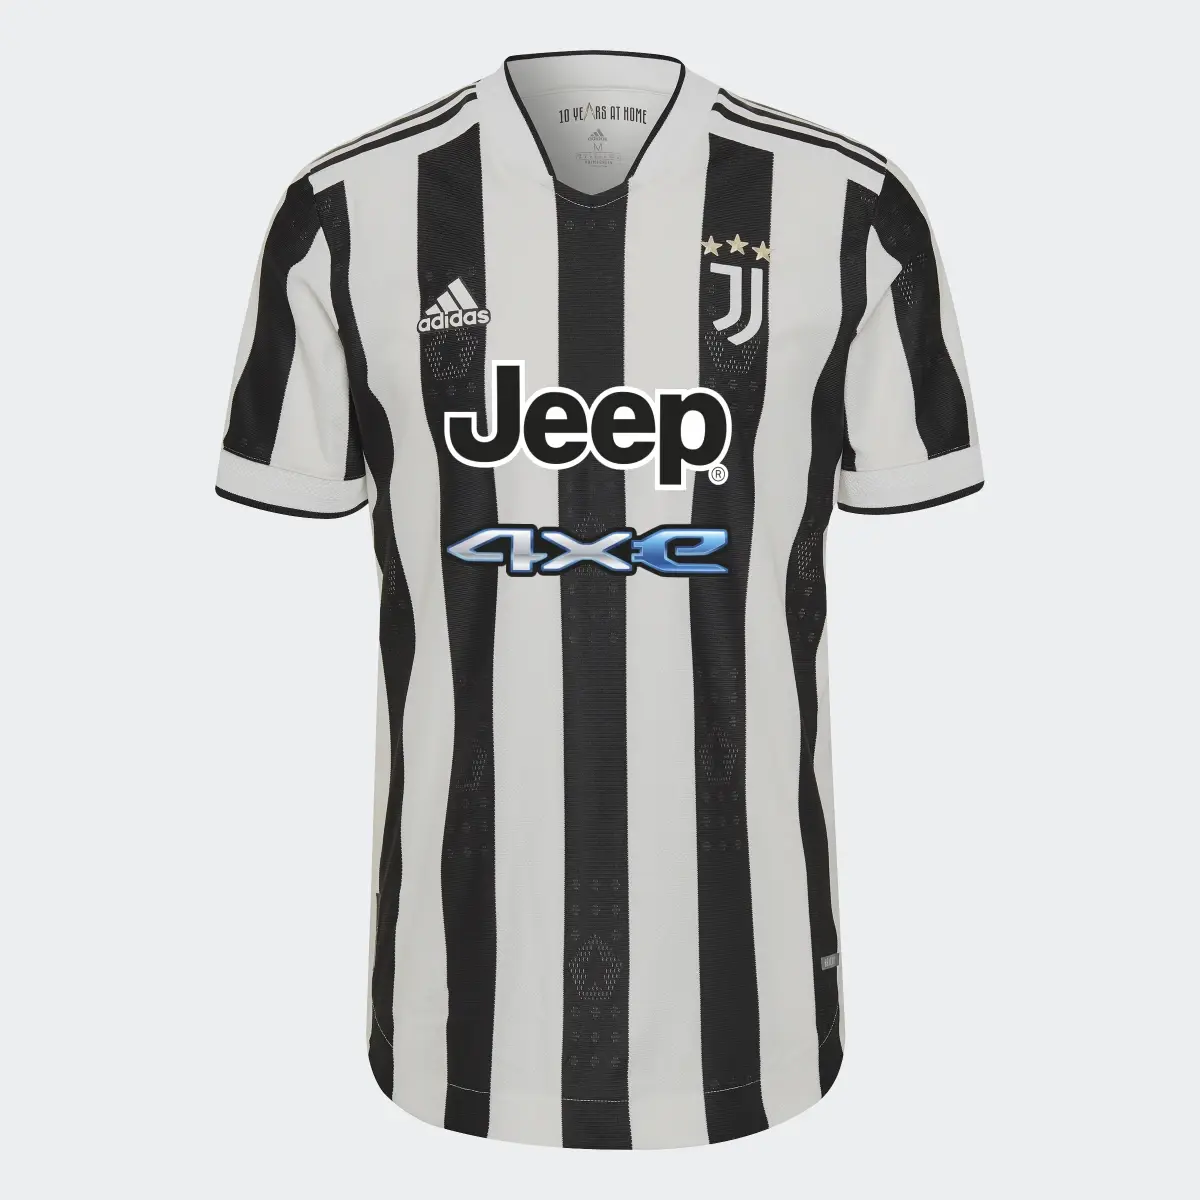 Adidas Juventus 21/22 Home Authentic Jersey. 1